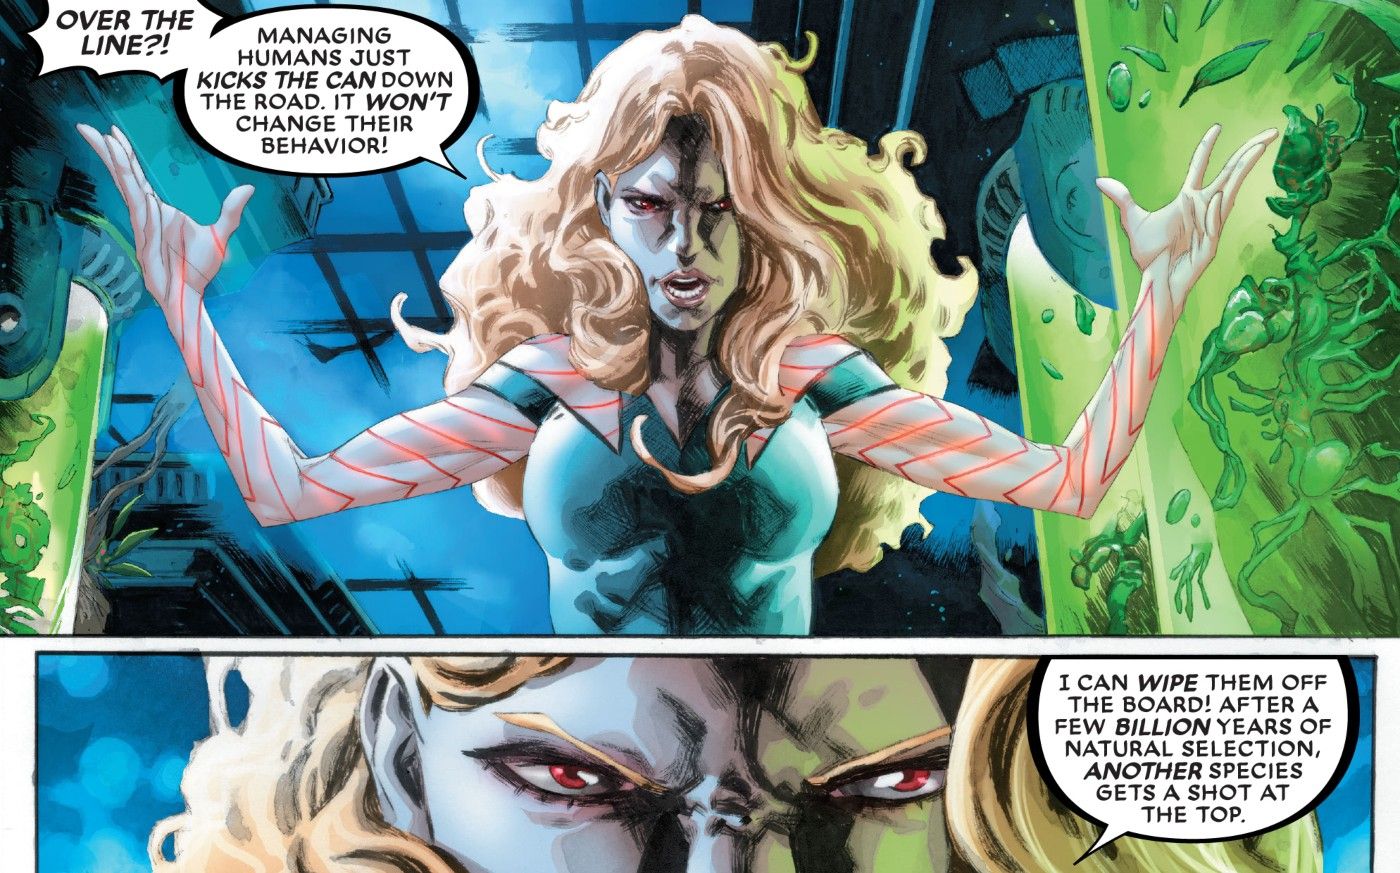 The Avengers’ Version of Poison Ivy is Way More Extreme Than DC’s